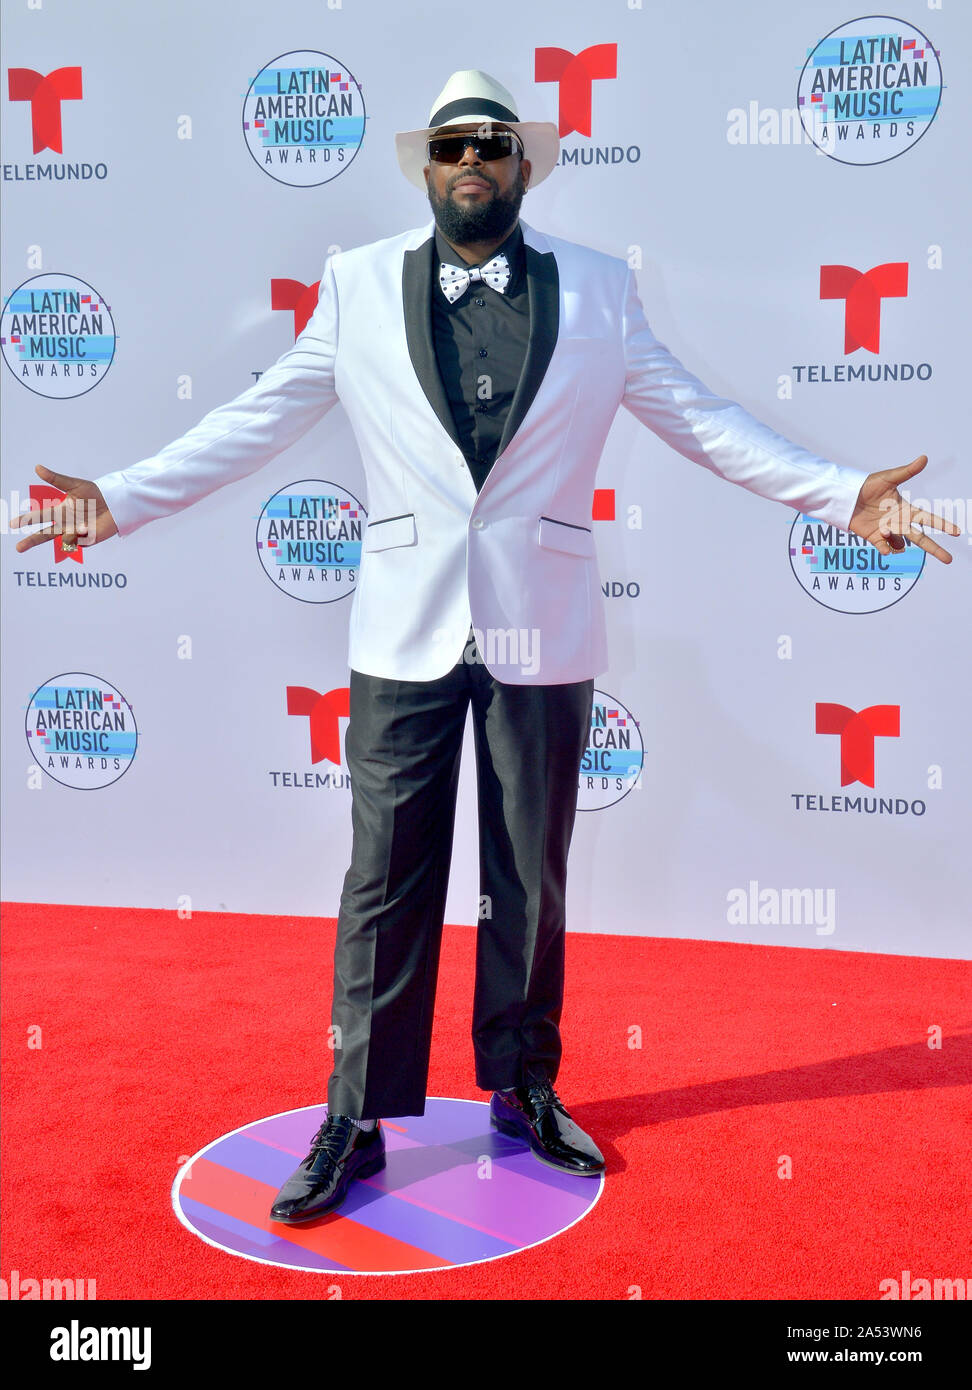 Los Angeles, United States. 17th Oct, 2019. Musical artist El Micha arrives for the fifth annual Latin American Music Awards at the Dolby Theatre in the Hollywood section of Los Angeles on Thursday, October 17, 2019. The annual event honors outstanding achievements for artists in the Latin music industry. Photo by Jim Ruymen/UPI Credit: UPI/Alamy Live News Stock Photo